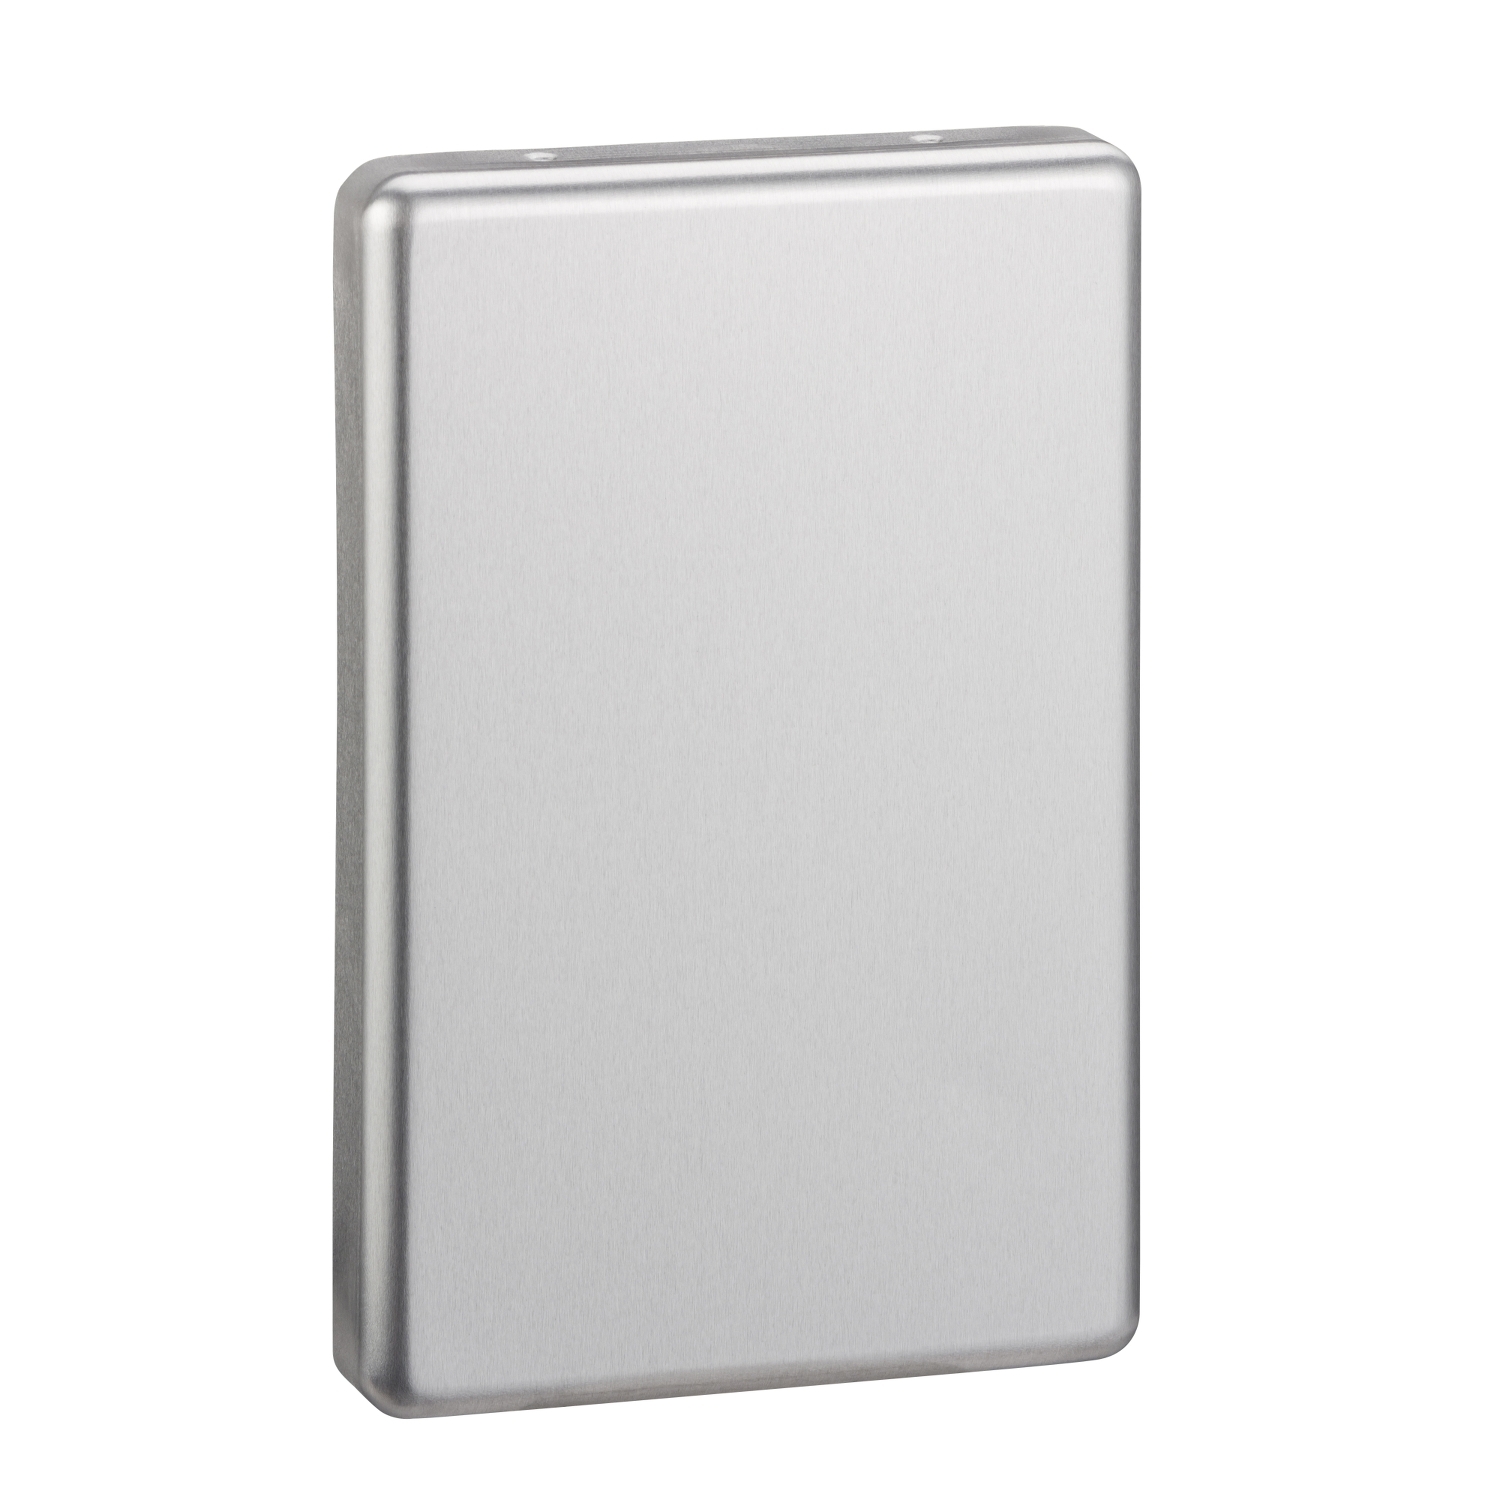 Switch Plate Covers - Blank